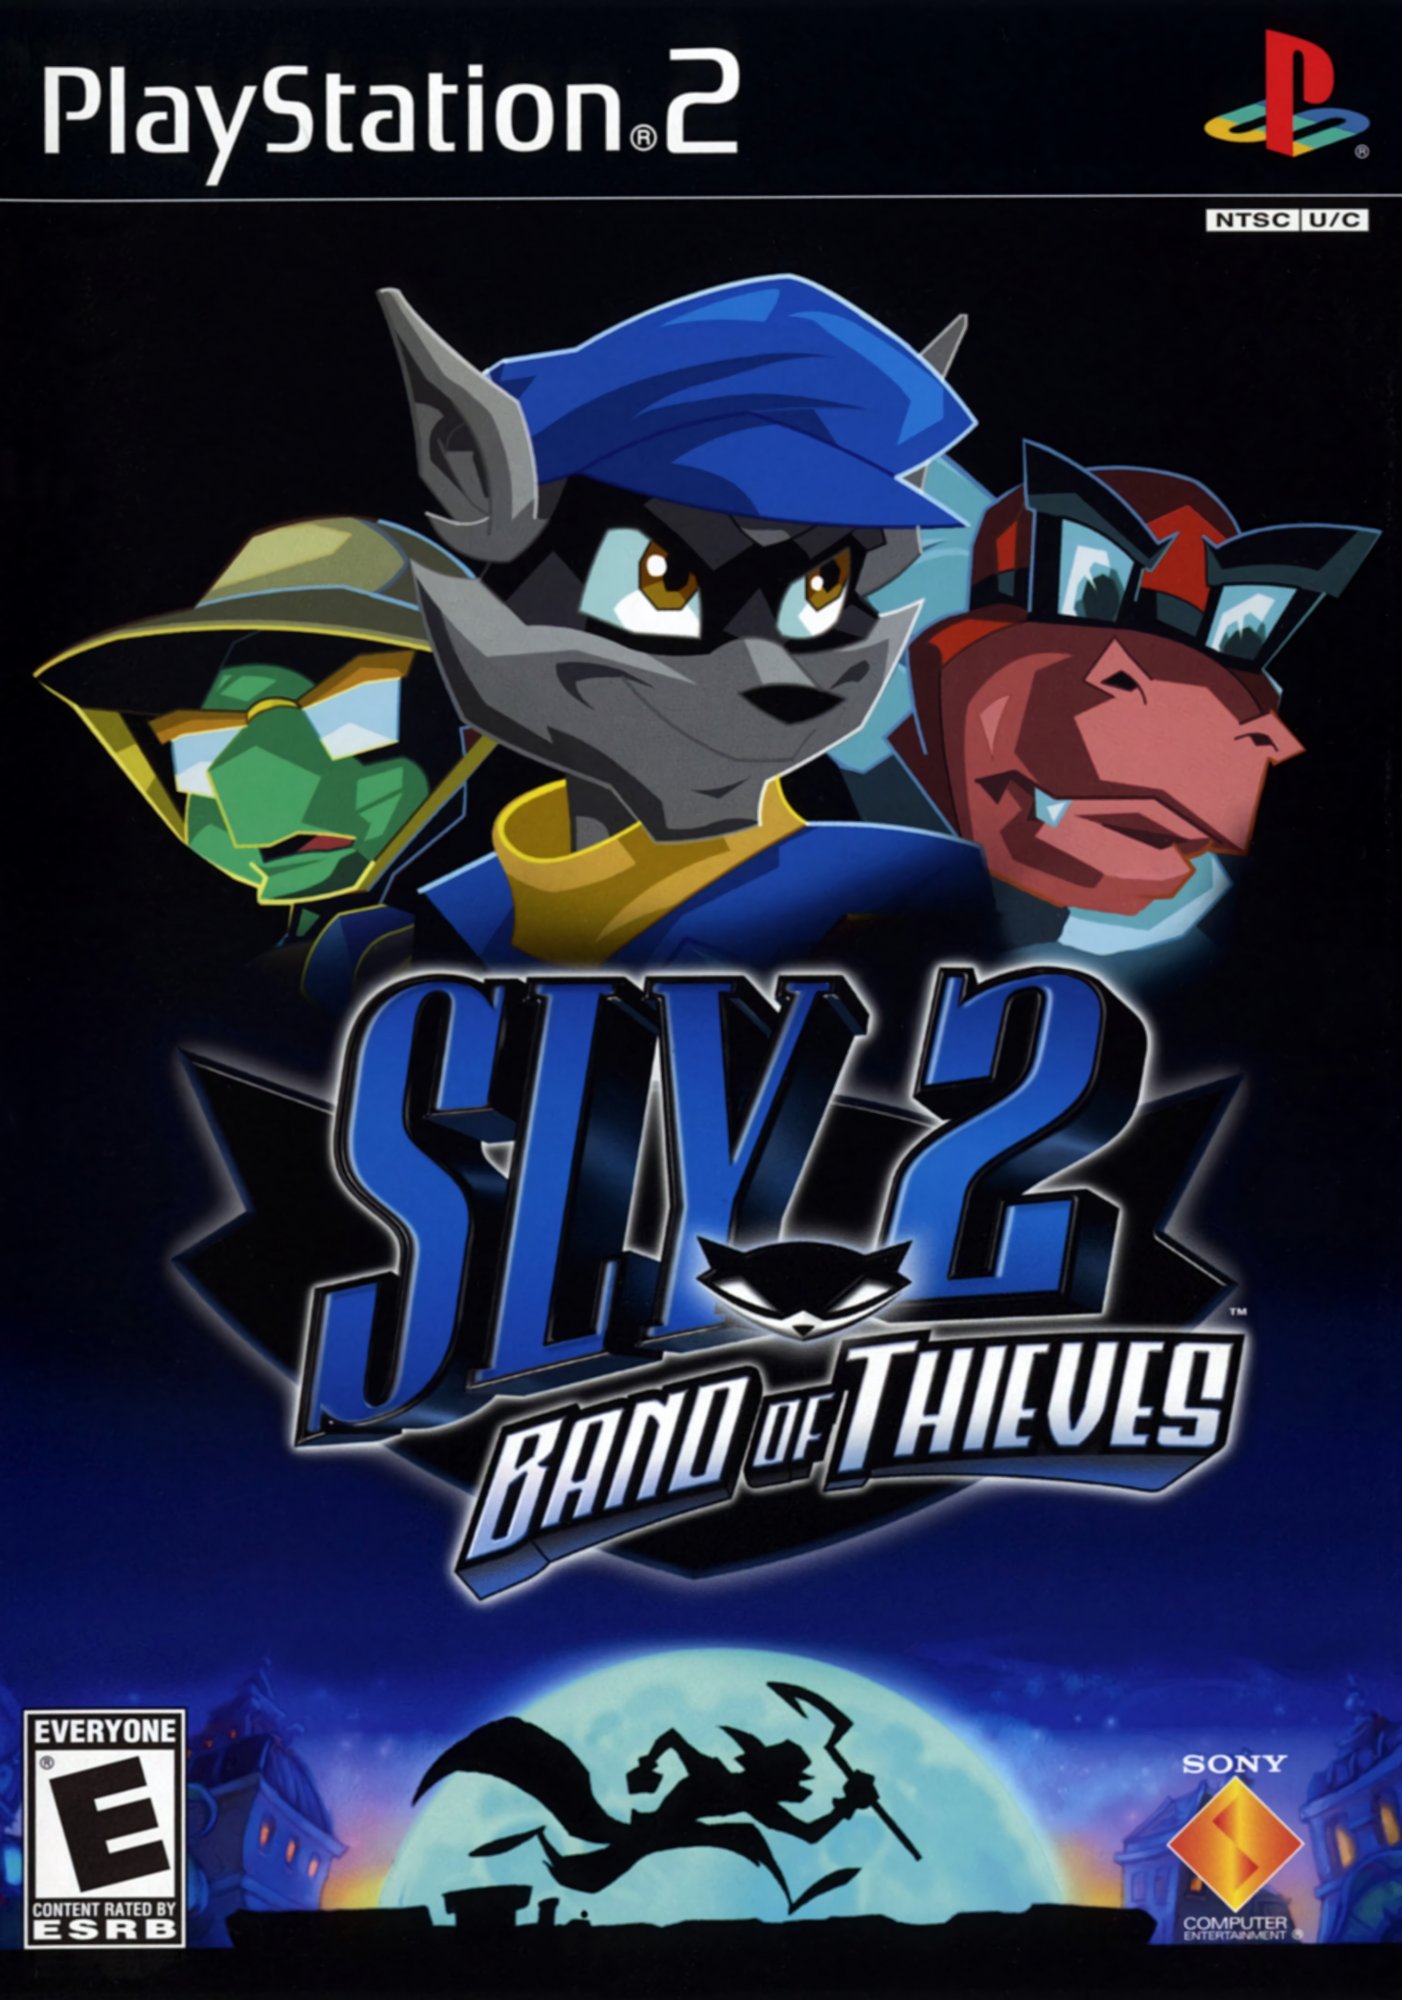 Sly Cooper and the Thievius Raccoonus ROM (ISO) Download for Sony